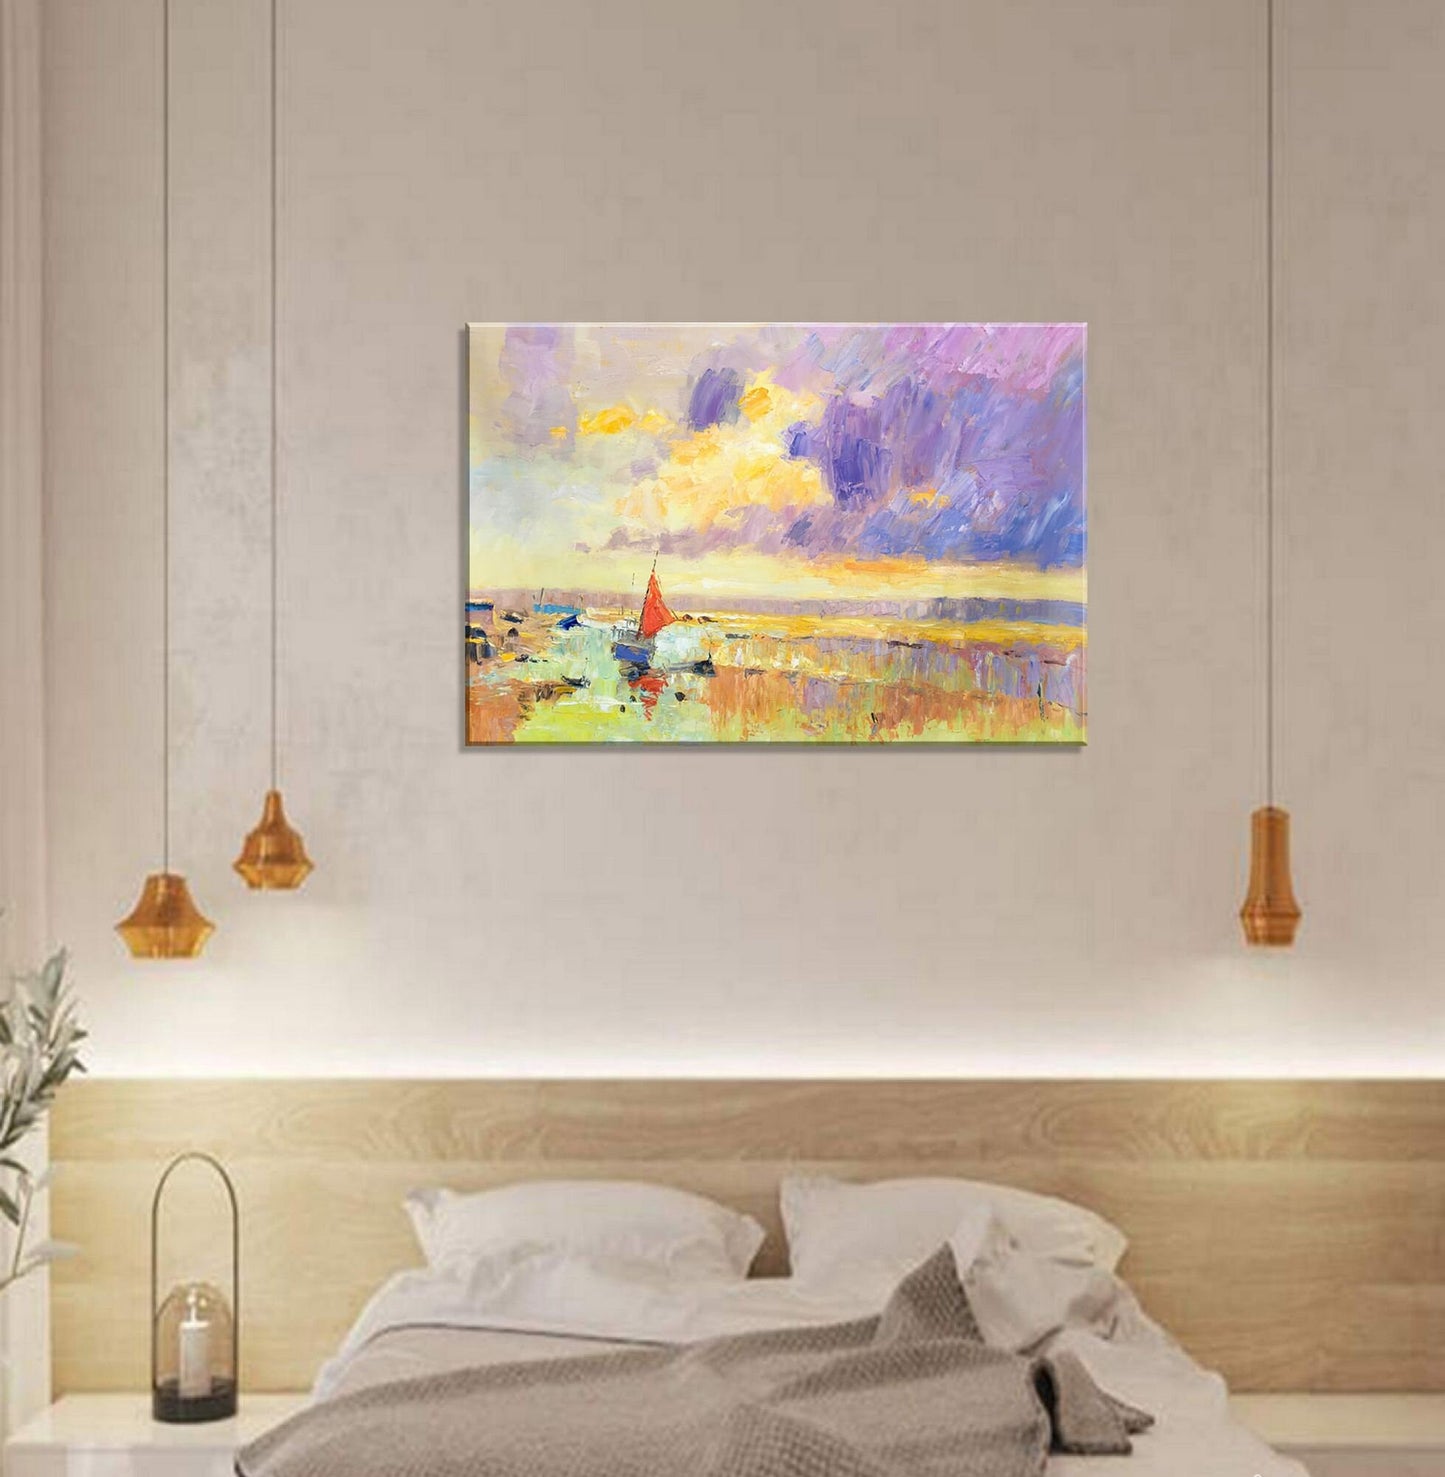 Oil Painting, Abstract Canvas Painting, Bedroom Wall Decor, Contemporary Art, Large Painting, Painting Abstract, Canvas Wall Decor, Seascape